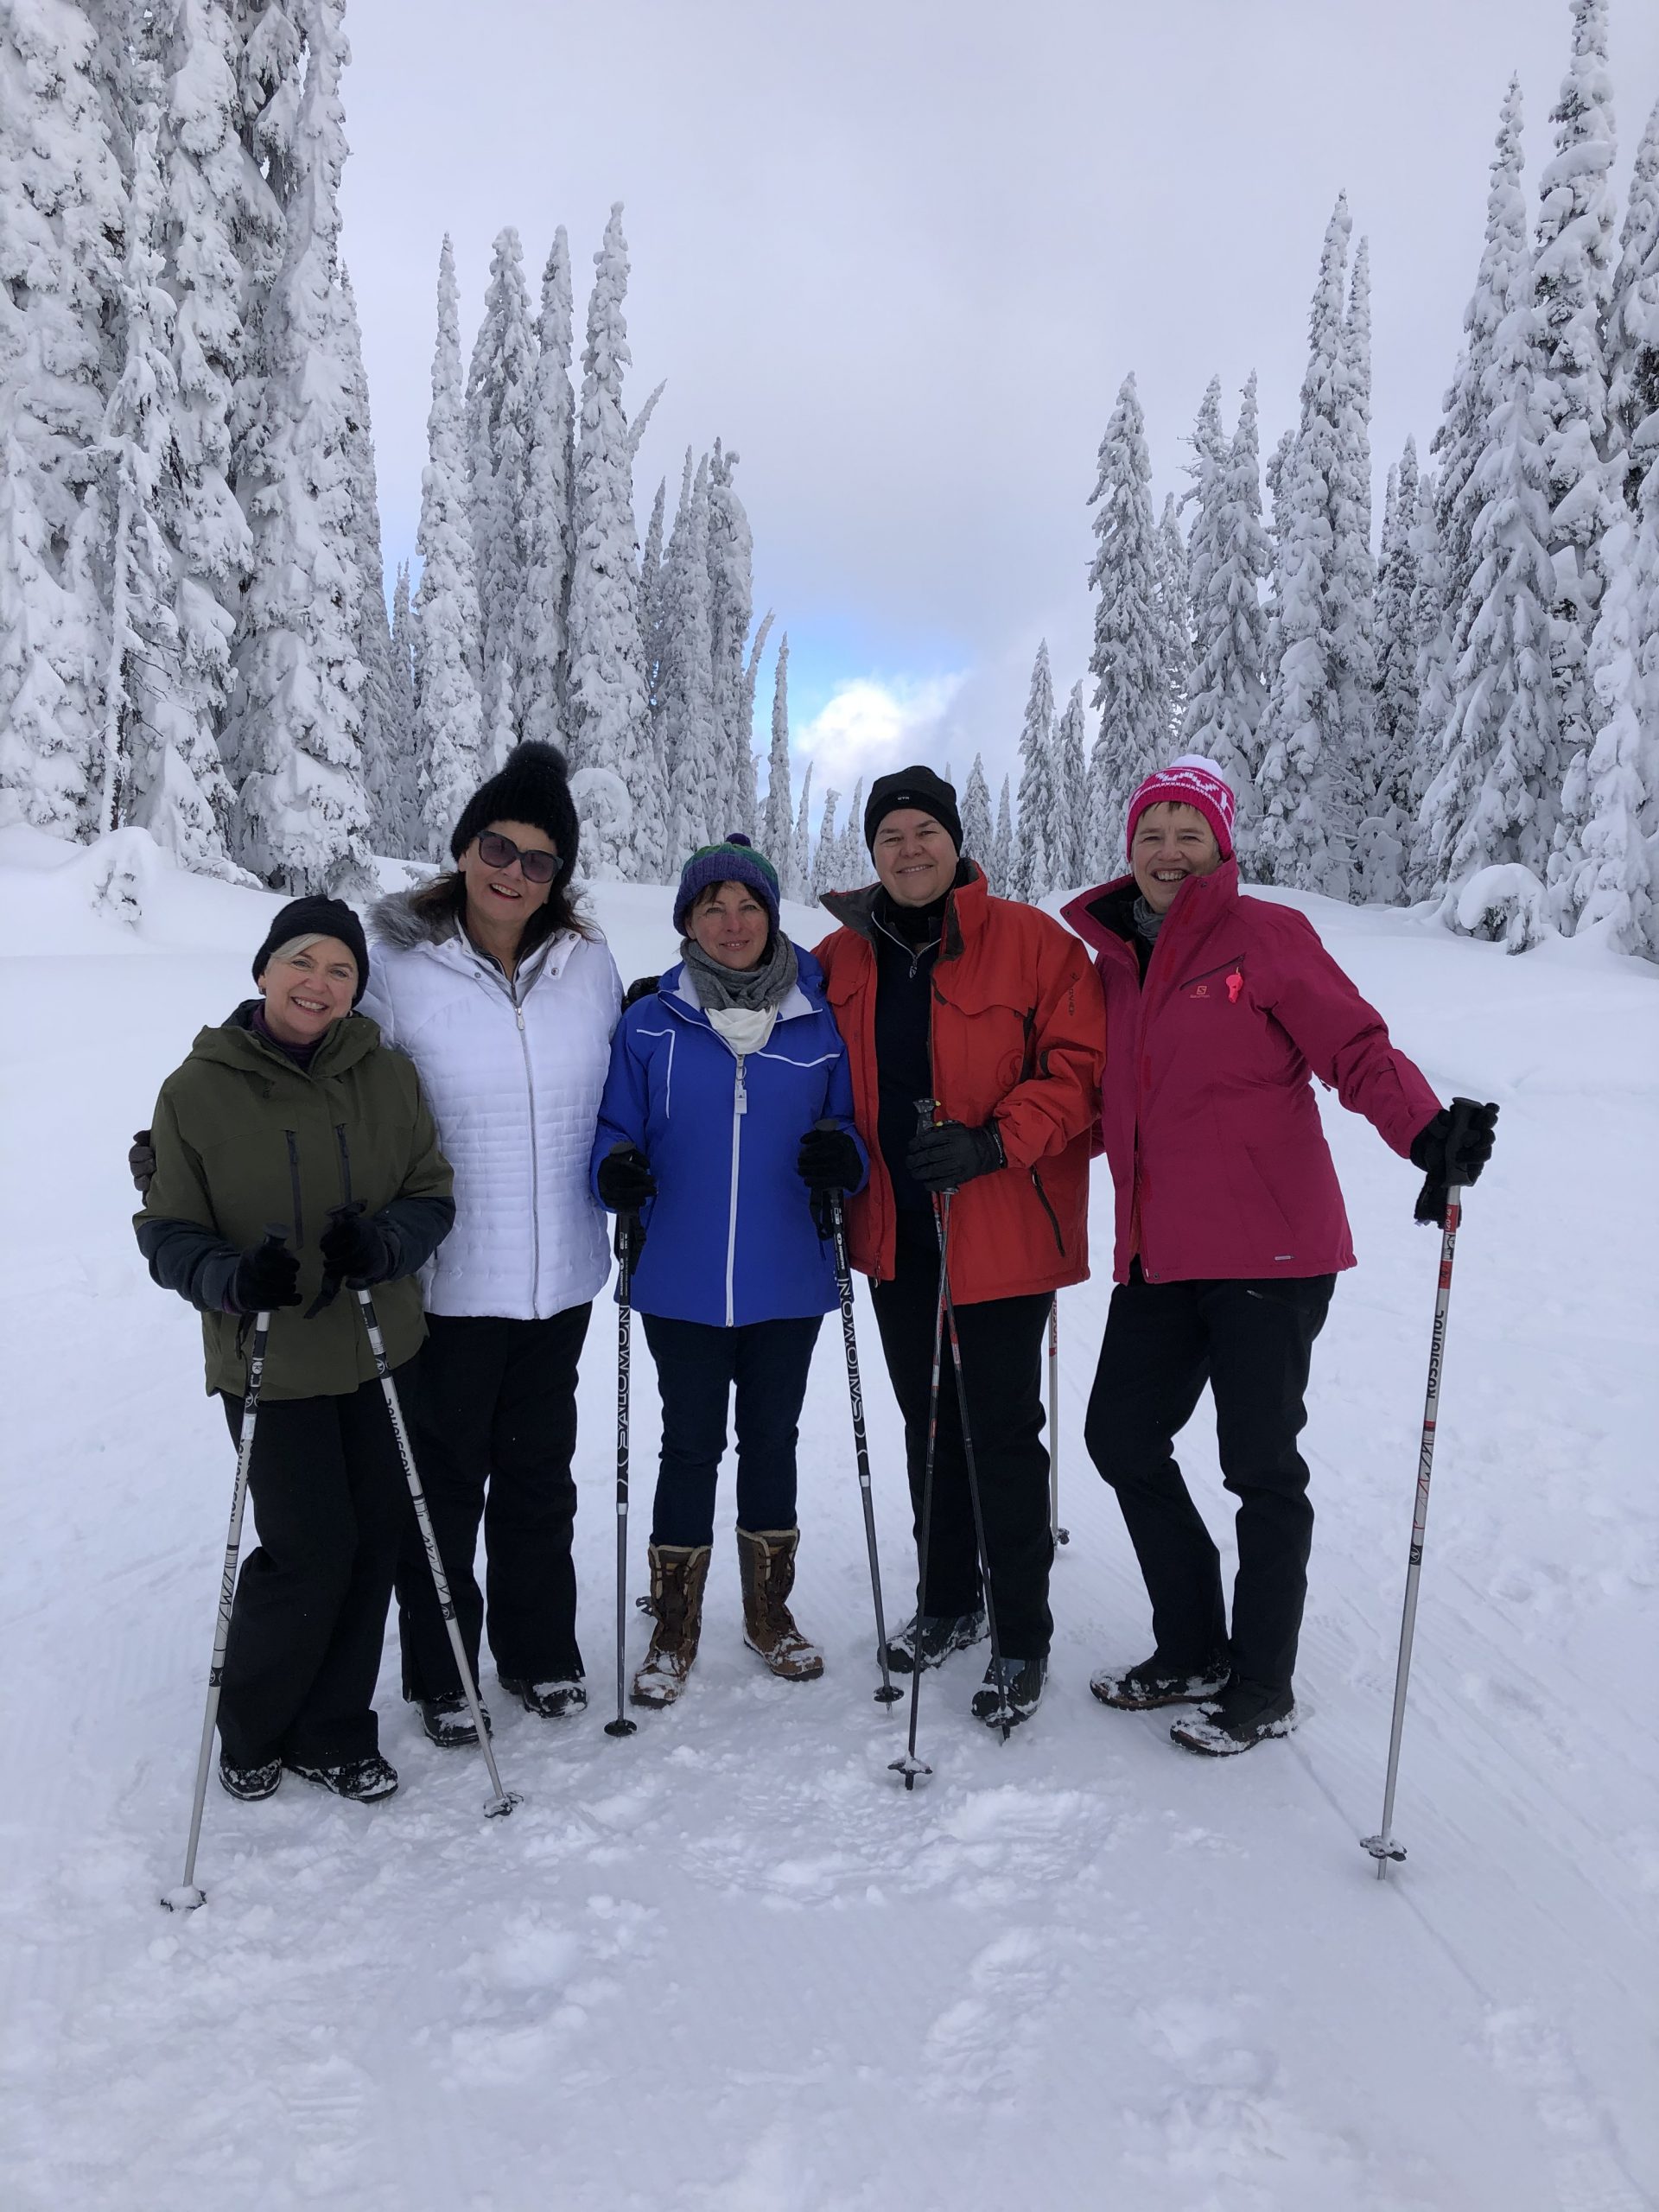 A group pepped up for a snowy day of fun at Big White